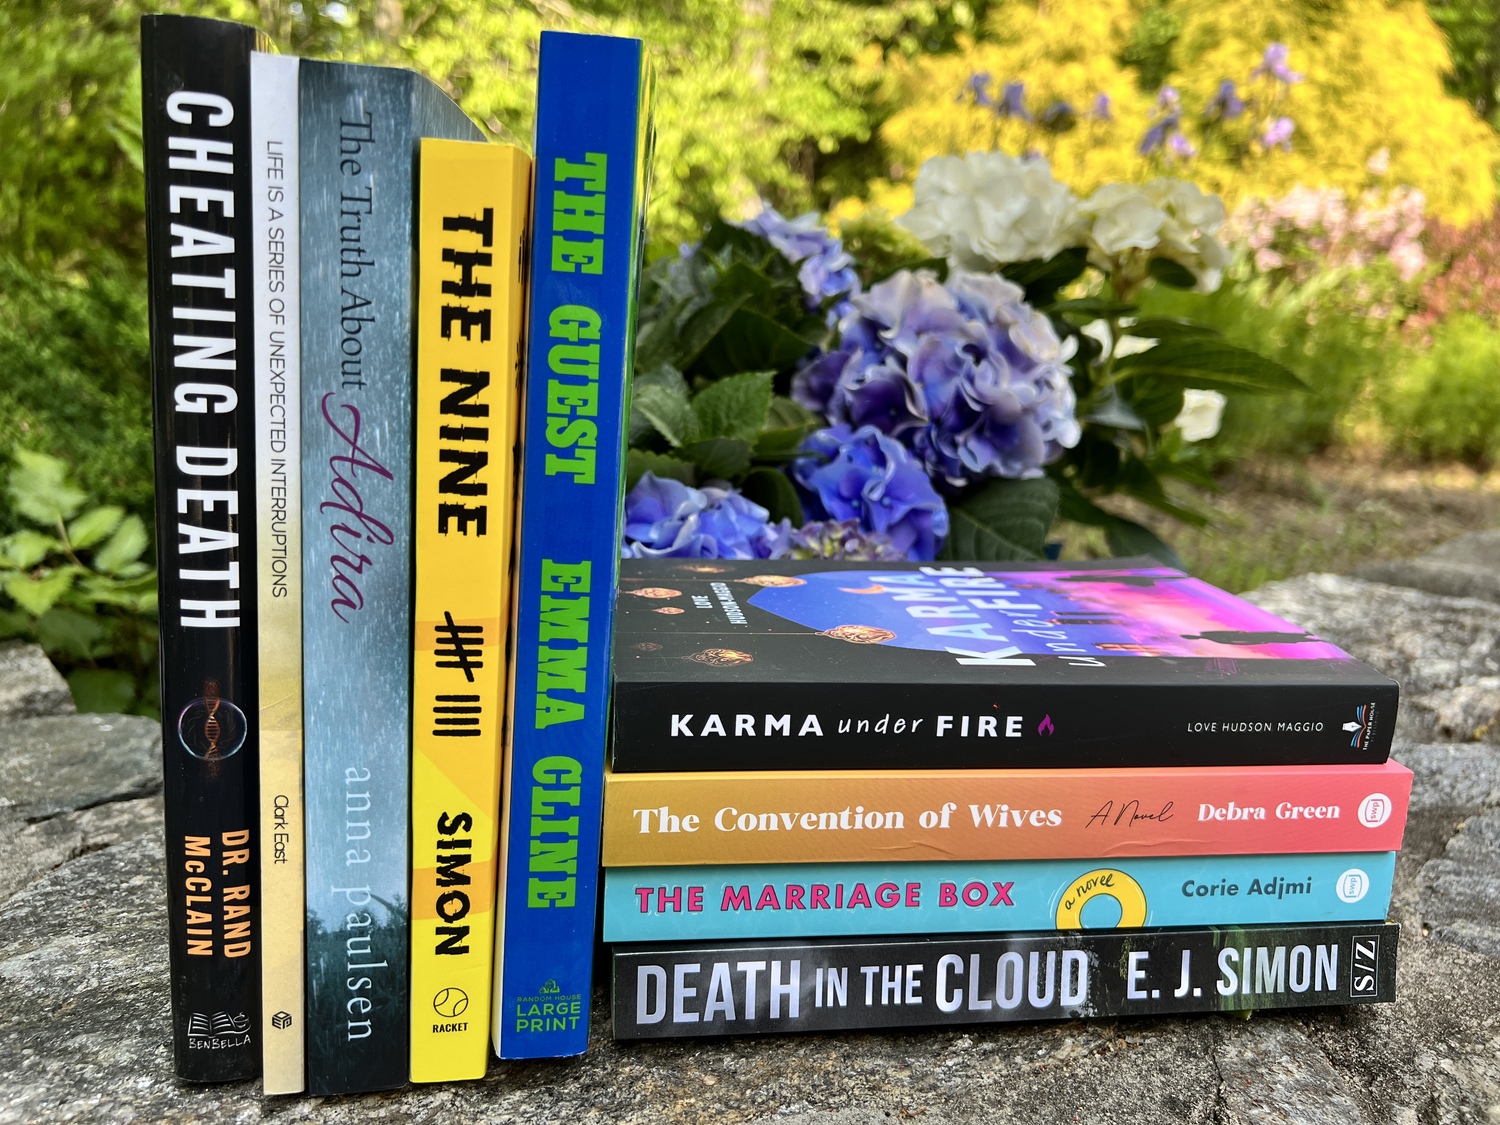 Bedside Reading kicks off the 2023 season on the East End with a fun lineup of beach reads available at local hotels. BEDSIDE READING